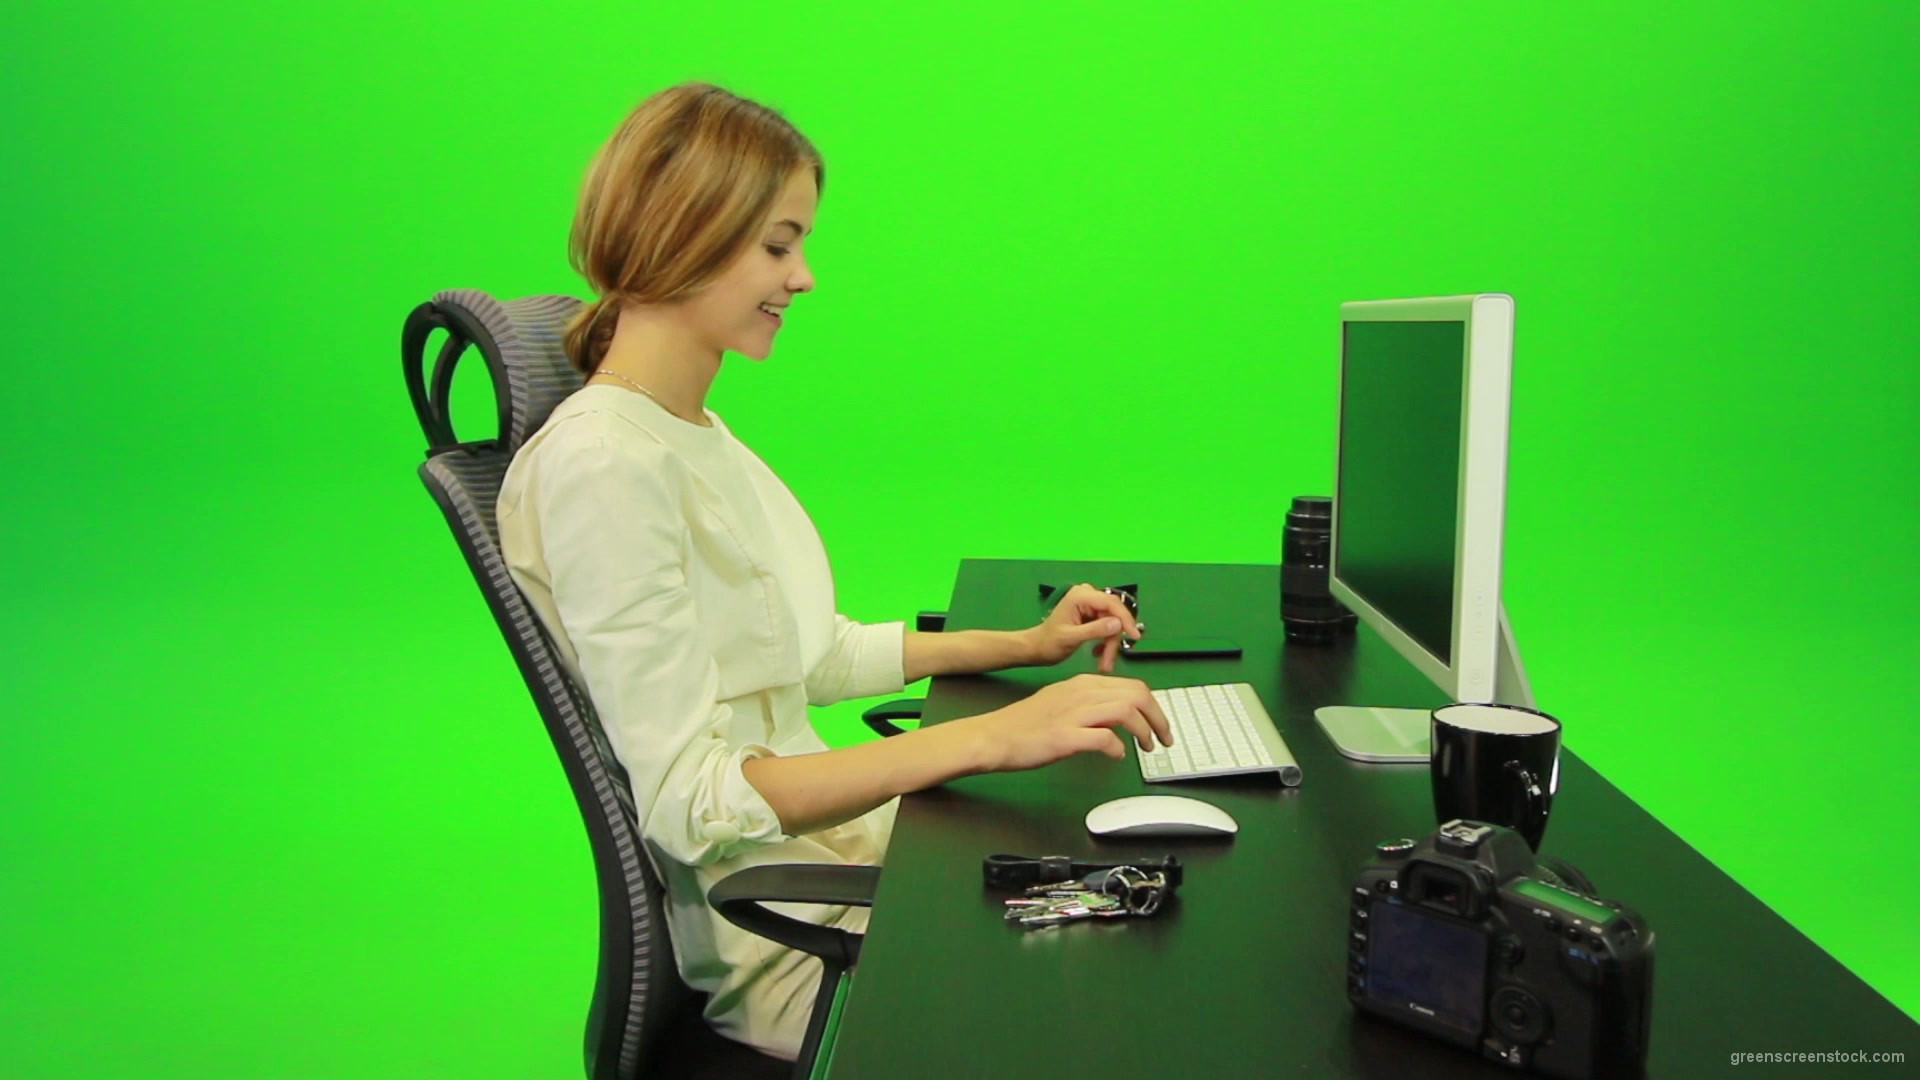 Laughing-Woman-Working-on-the-Computer-Green-Screen-Footage_006 Green Screen Stock